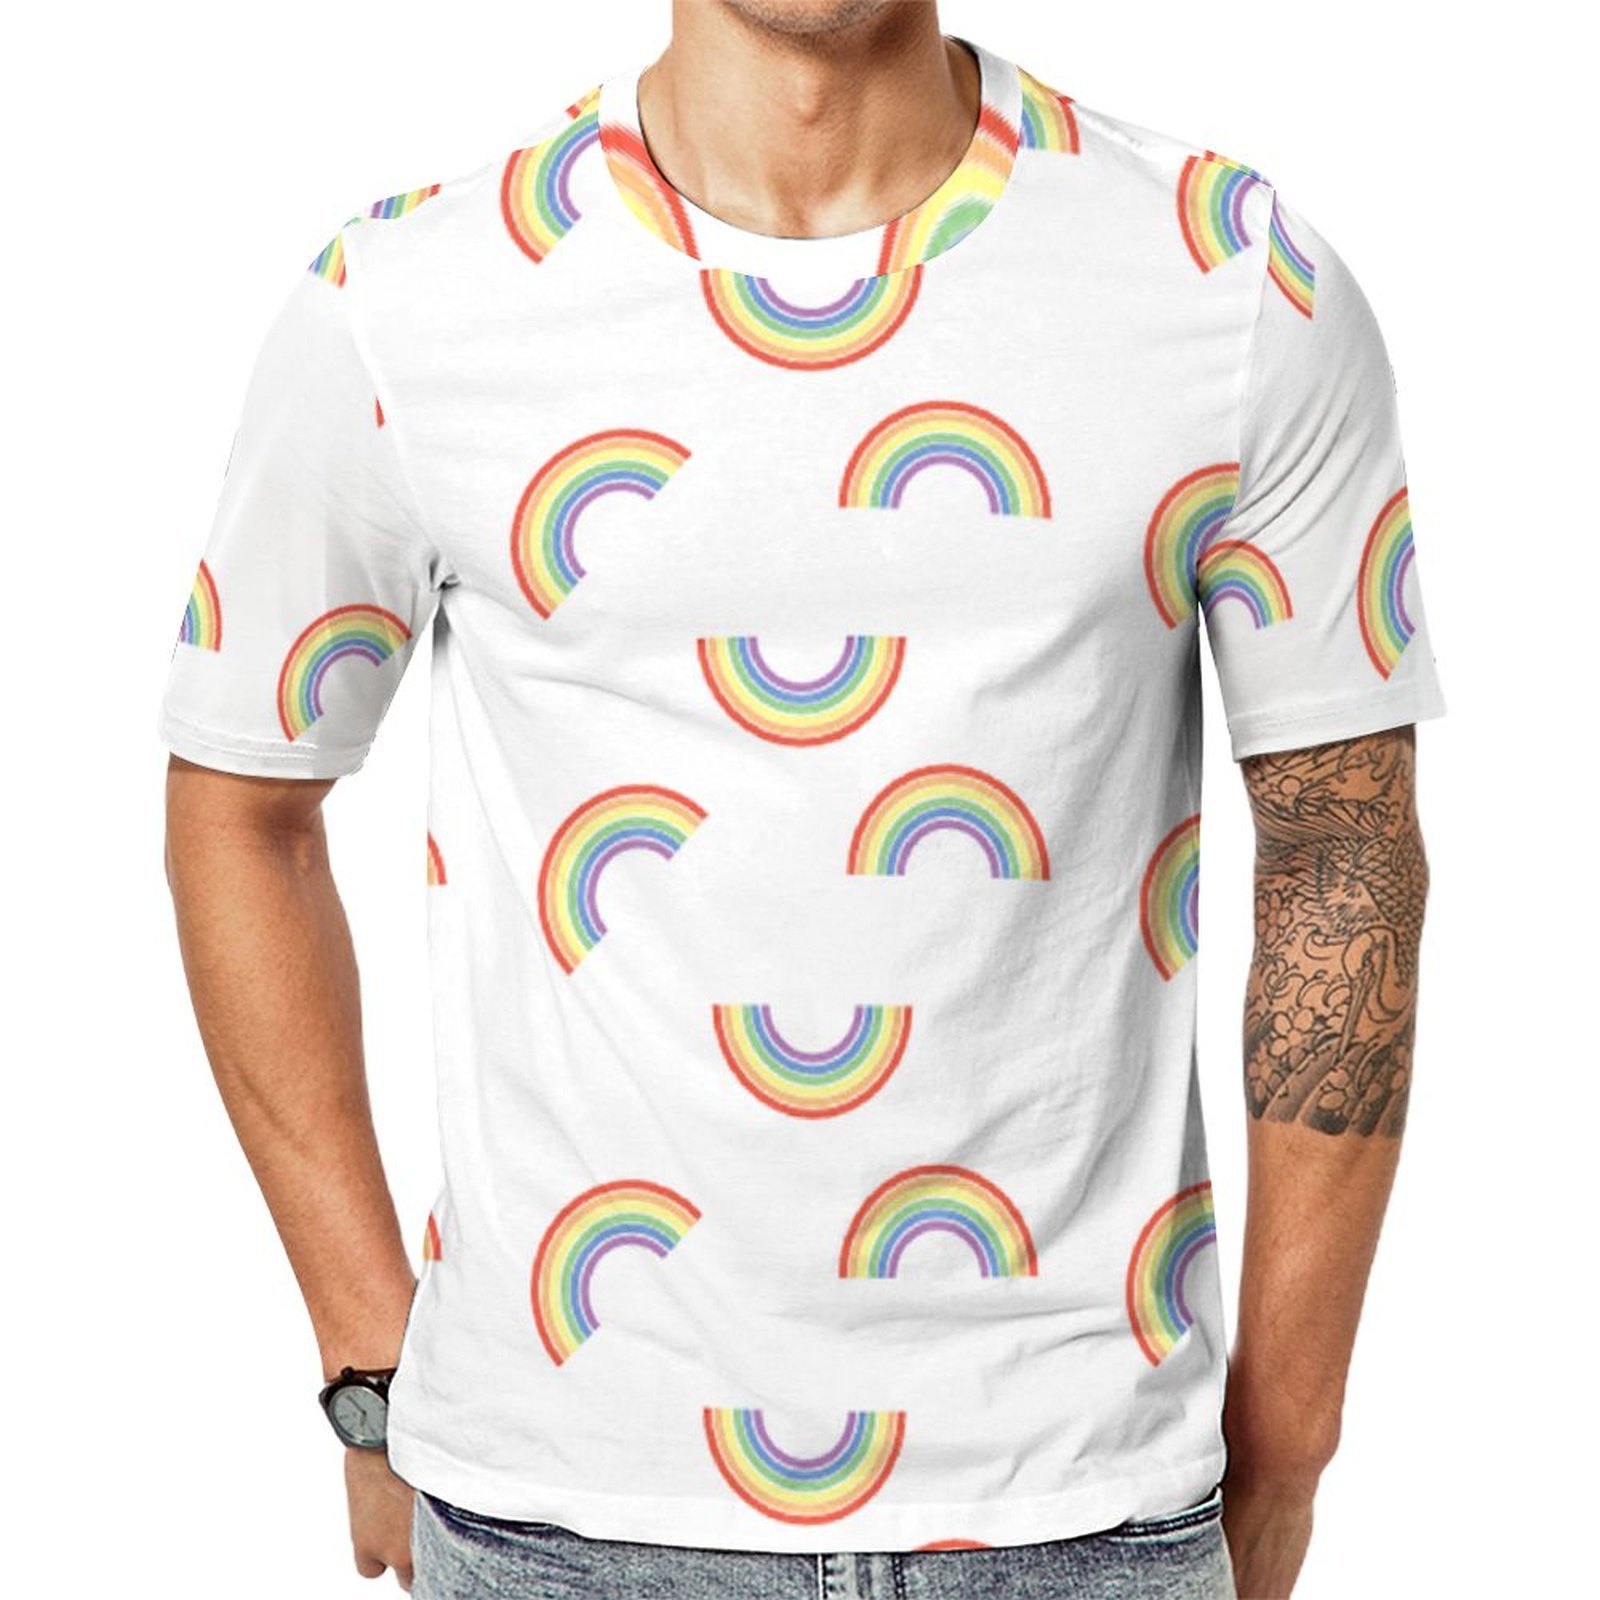 Colorful Rainbow Happy Stay Positive Short Sleeve Print Unisex Tshirt Summer Casual Tees for Men and Women Coolcoshirts